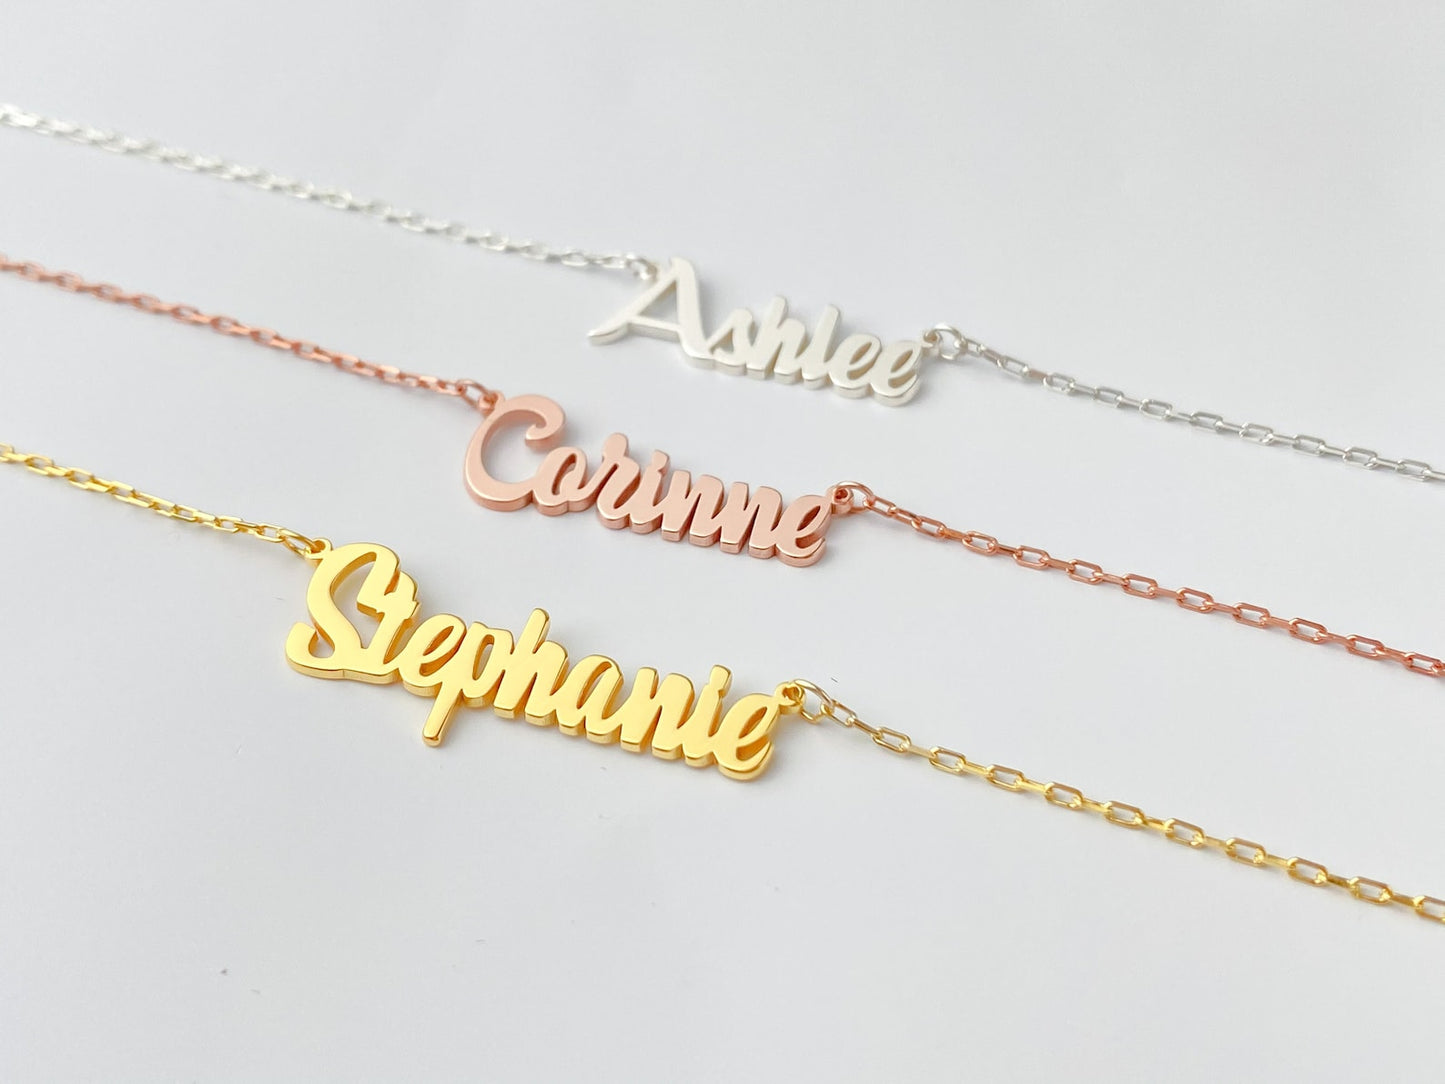 Name Necklace 2.0